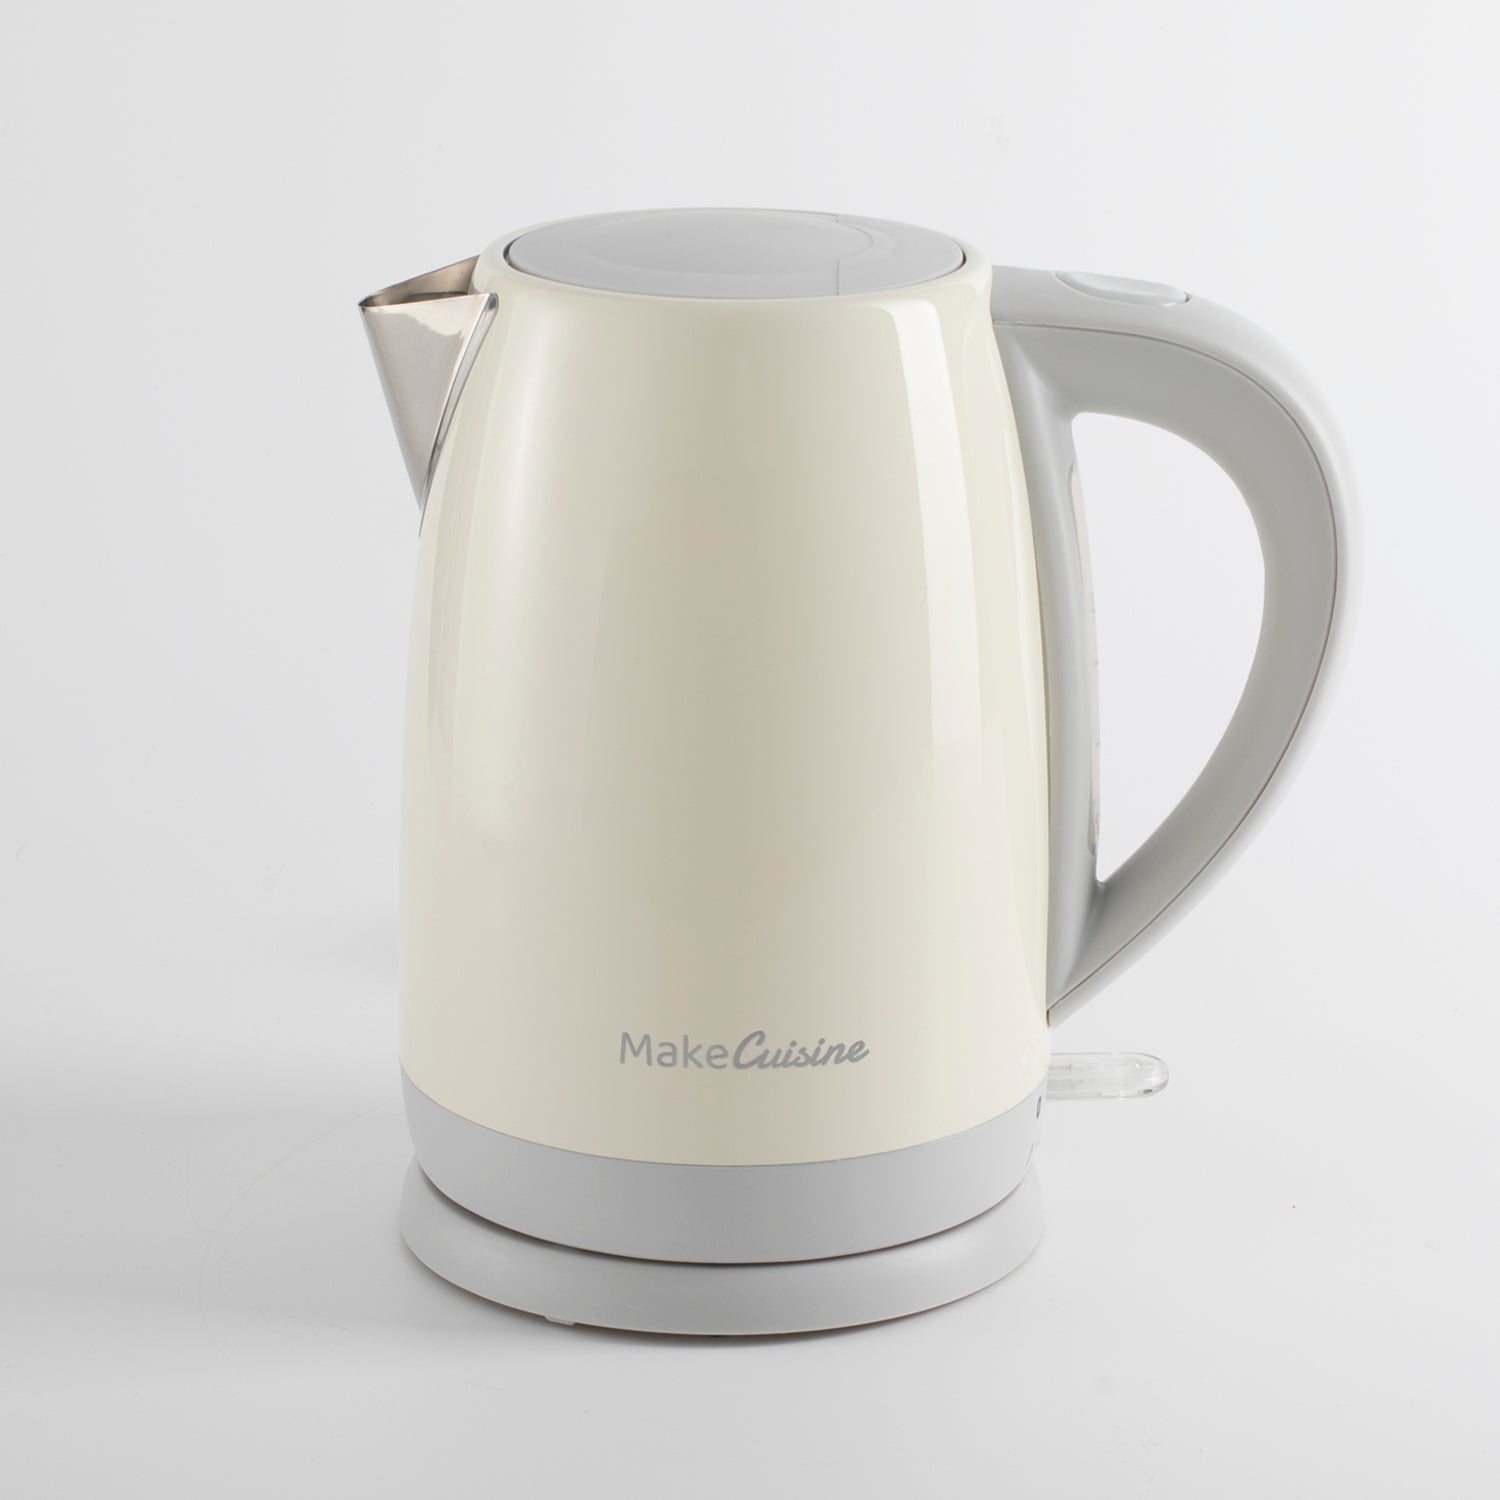 Loft Inspire Collection Kettle